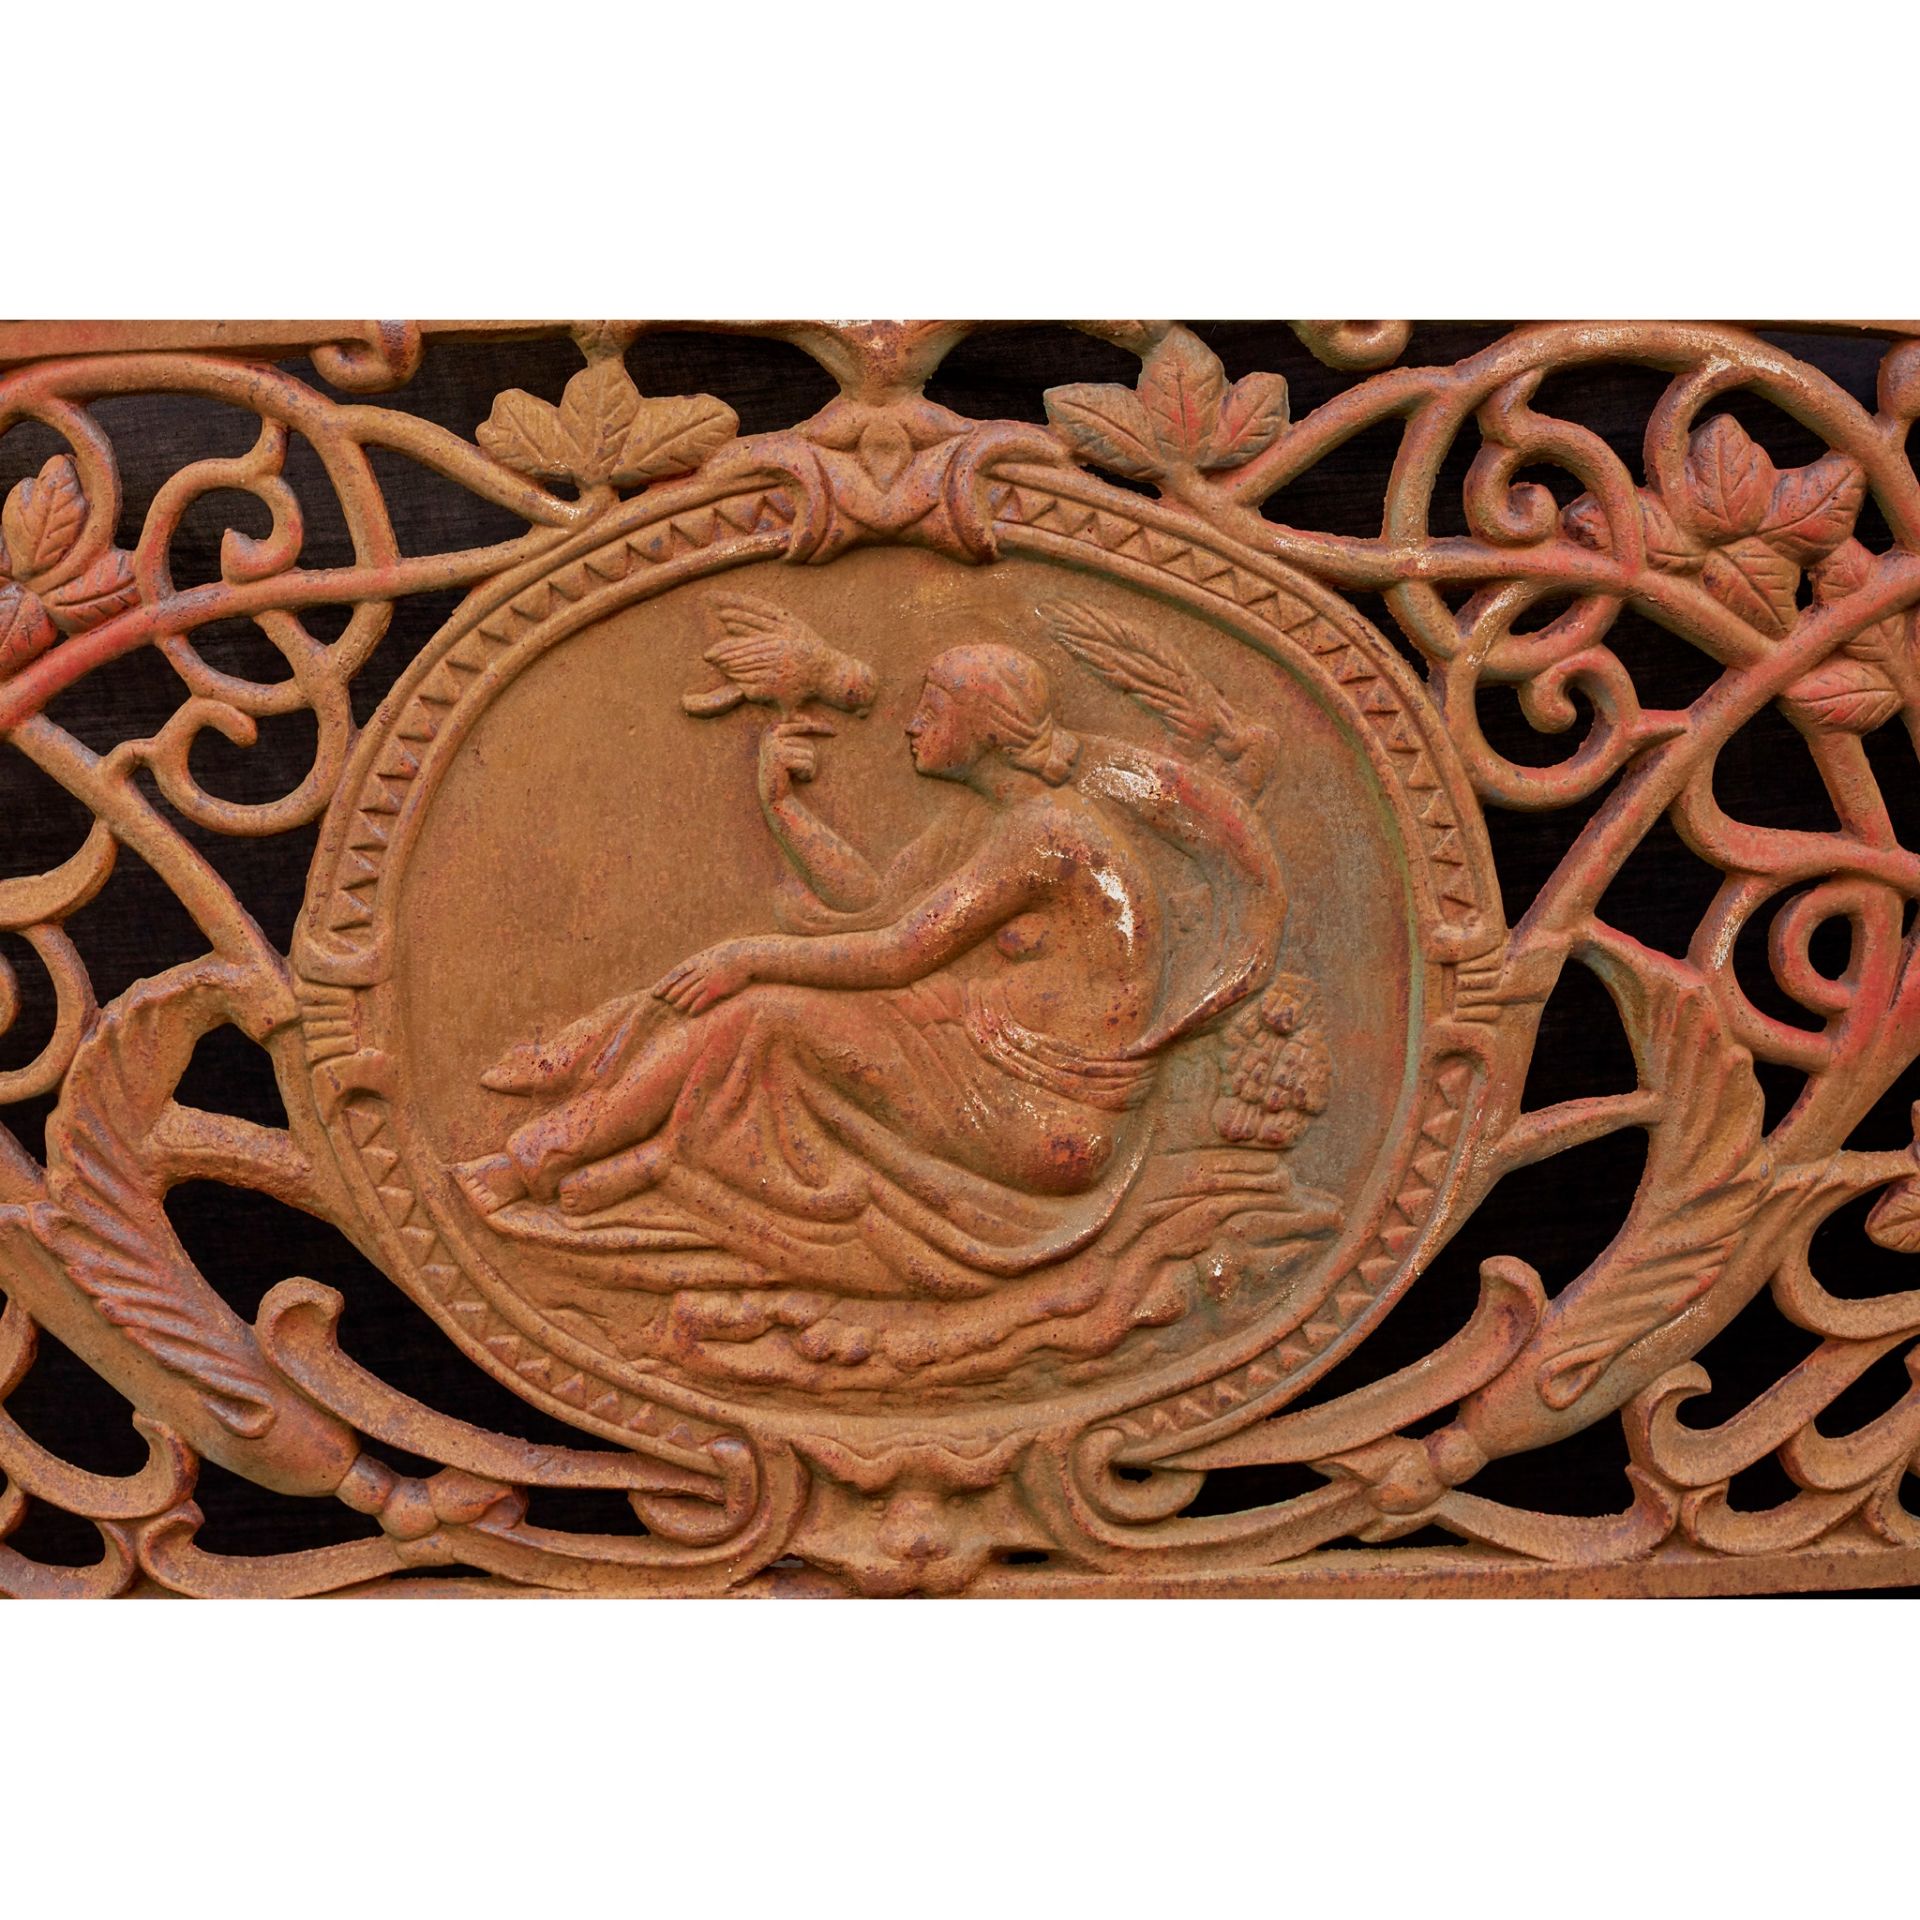 VICTORIAN CAST IRON 'MEDALLION' PATTERN GARDEN BENCH, PROBABLY COALBROOKDALE 19TH CENTURY - Image 2 of 2